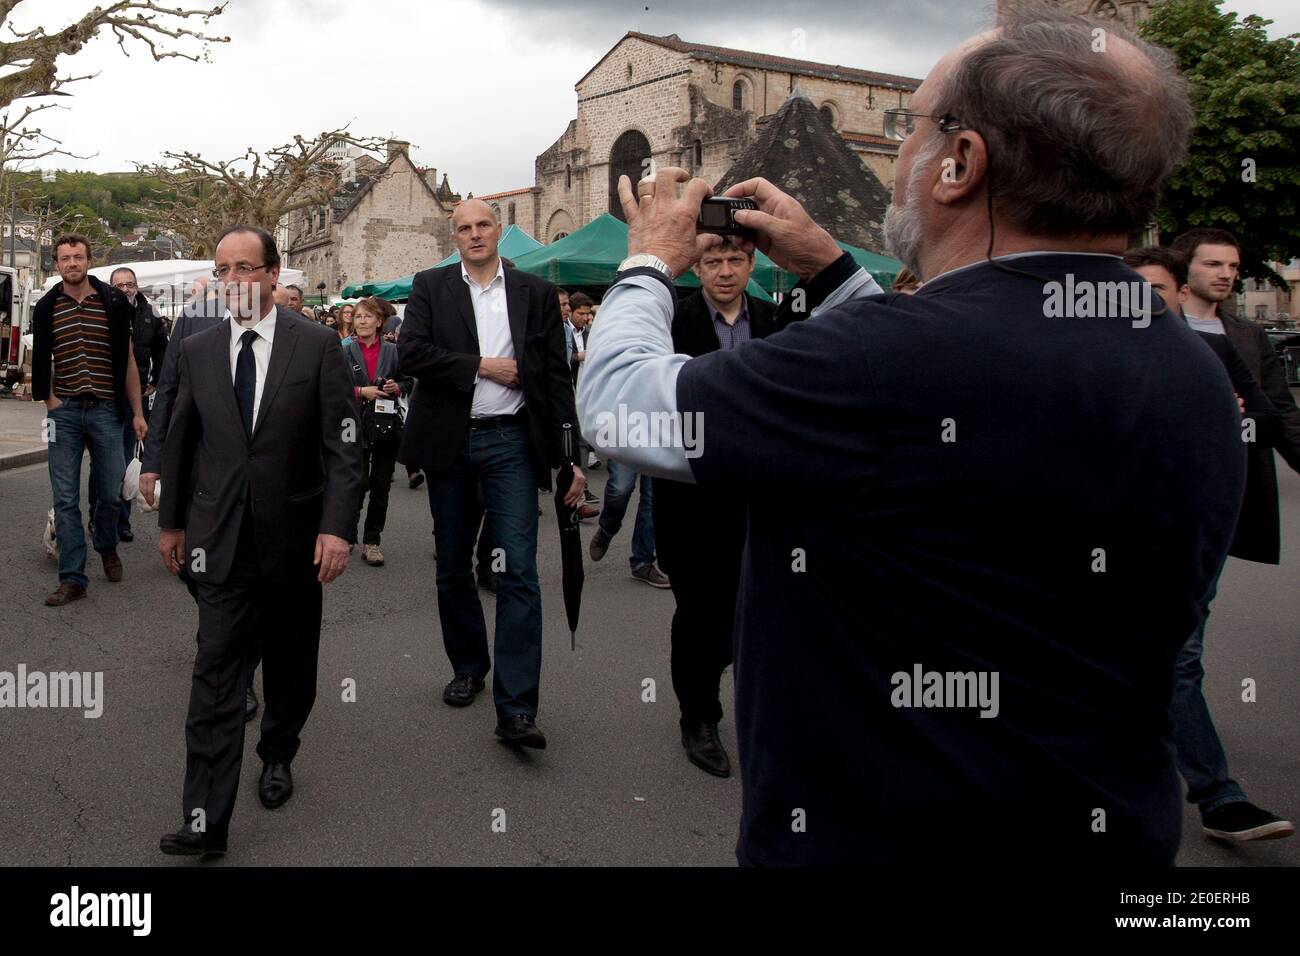 French Socialist Party (PS) President of the Correze Council General Assembly Francois Hollande visits a market in Tulle, France, on may 05, 2012. Photo by Stephane Lemouton/ABACAPRESS.COM. Stock Photo